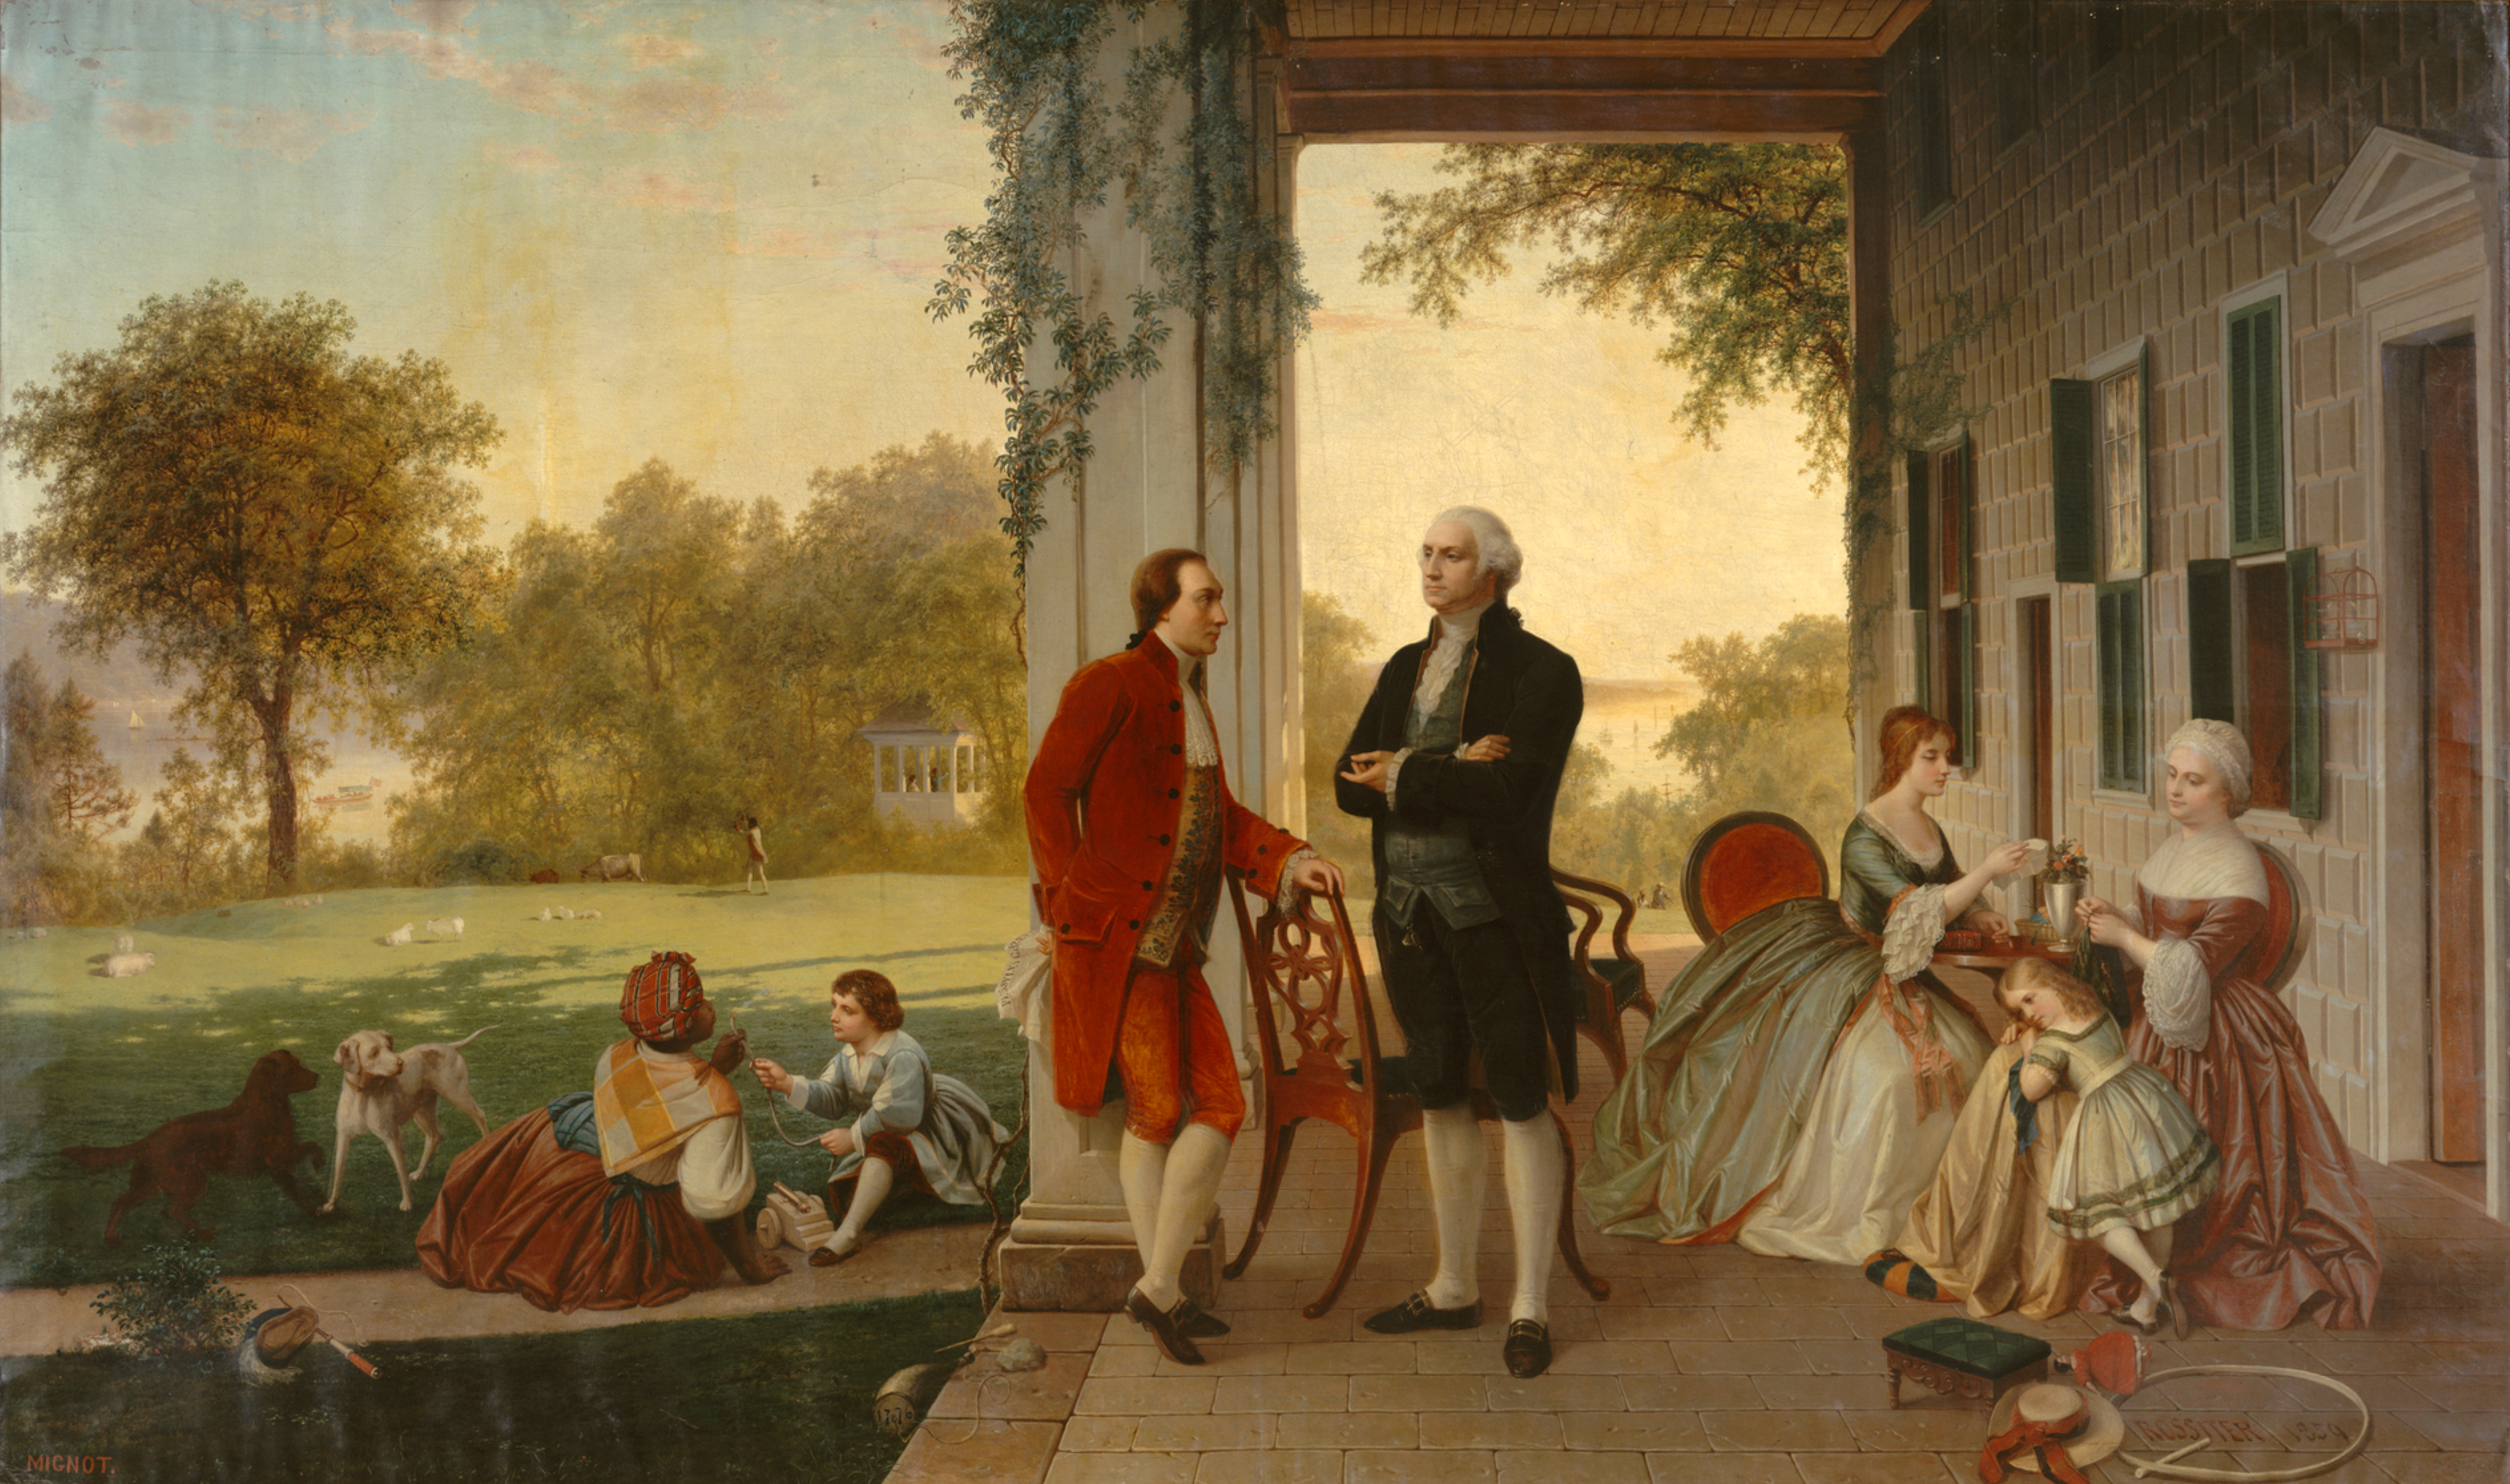 Washington and Lafayette at Mount Vernon, 1784 (The Home of Washington after the War) by Thomas Prichard Rossiter and Louis Rémy Mignot, oil on canvas, 1859.